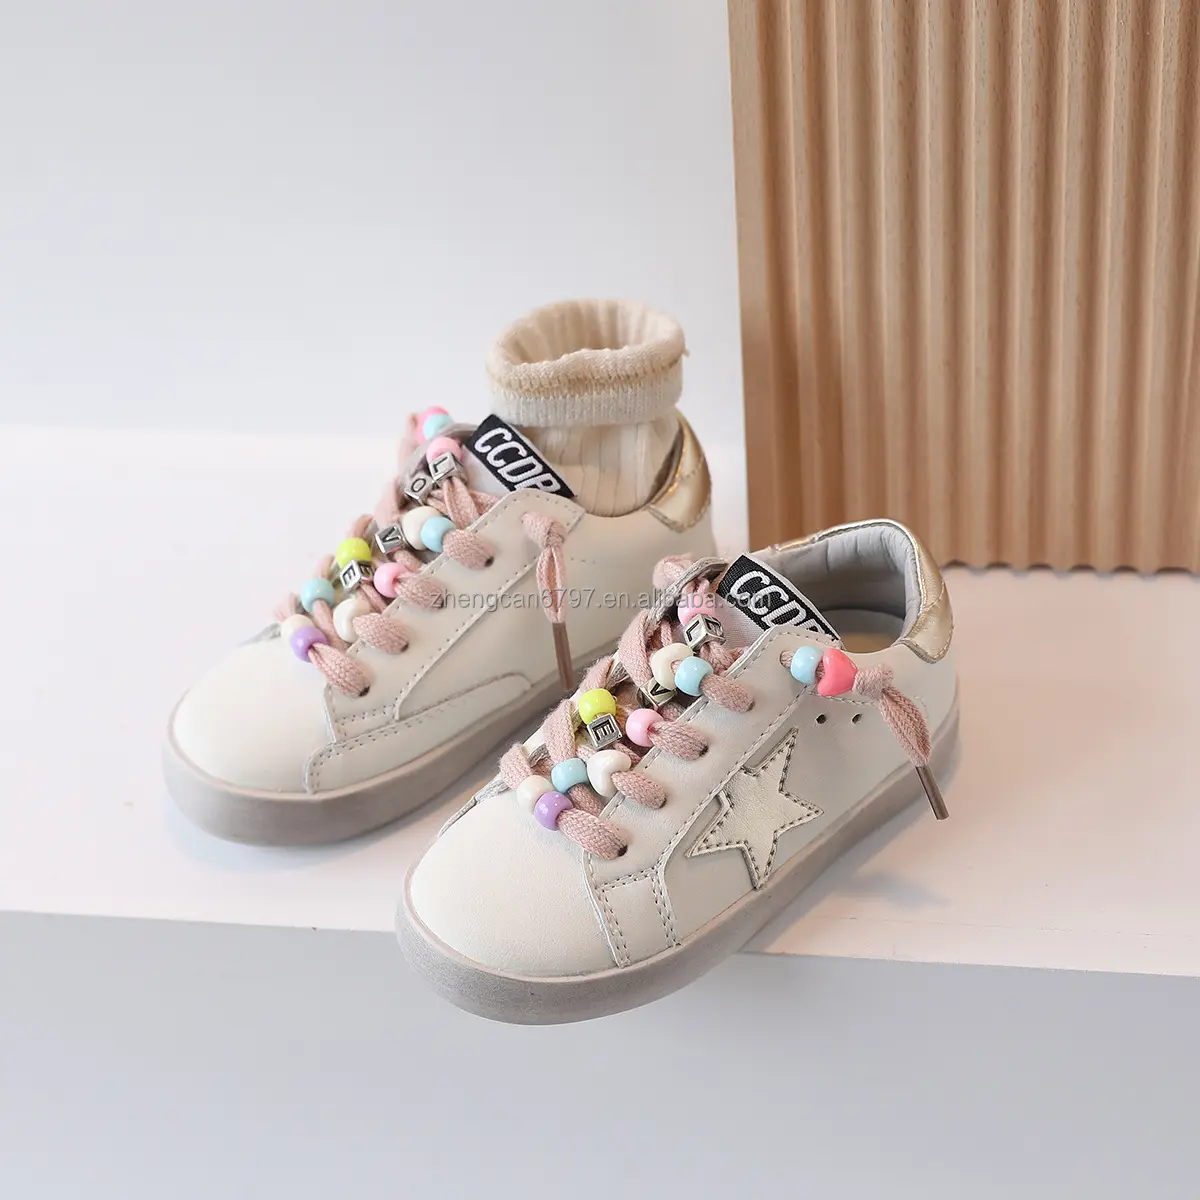 High Quality Girls Sneakers Candy Star Genuine Leather Kids Cute Dirty Shoes New Born Baby Colored Bead Shoe